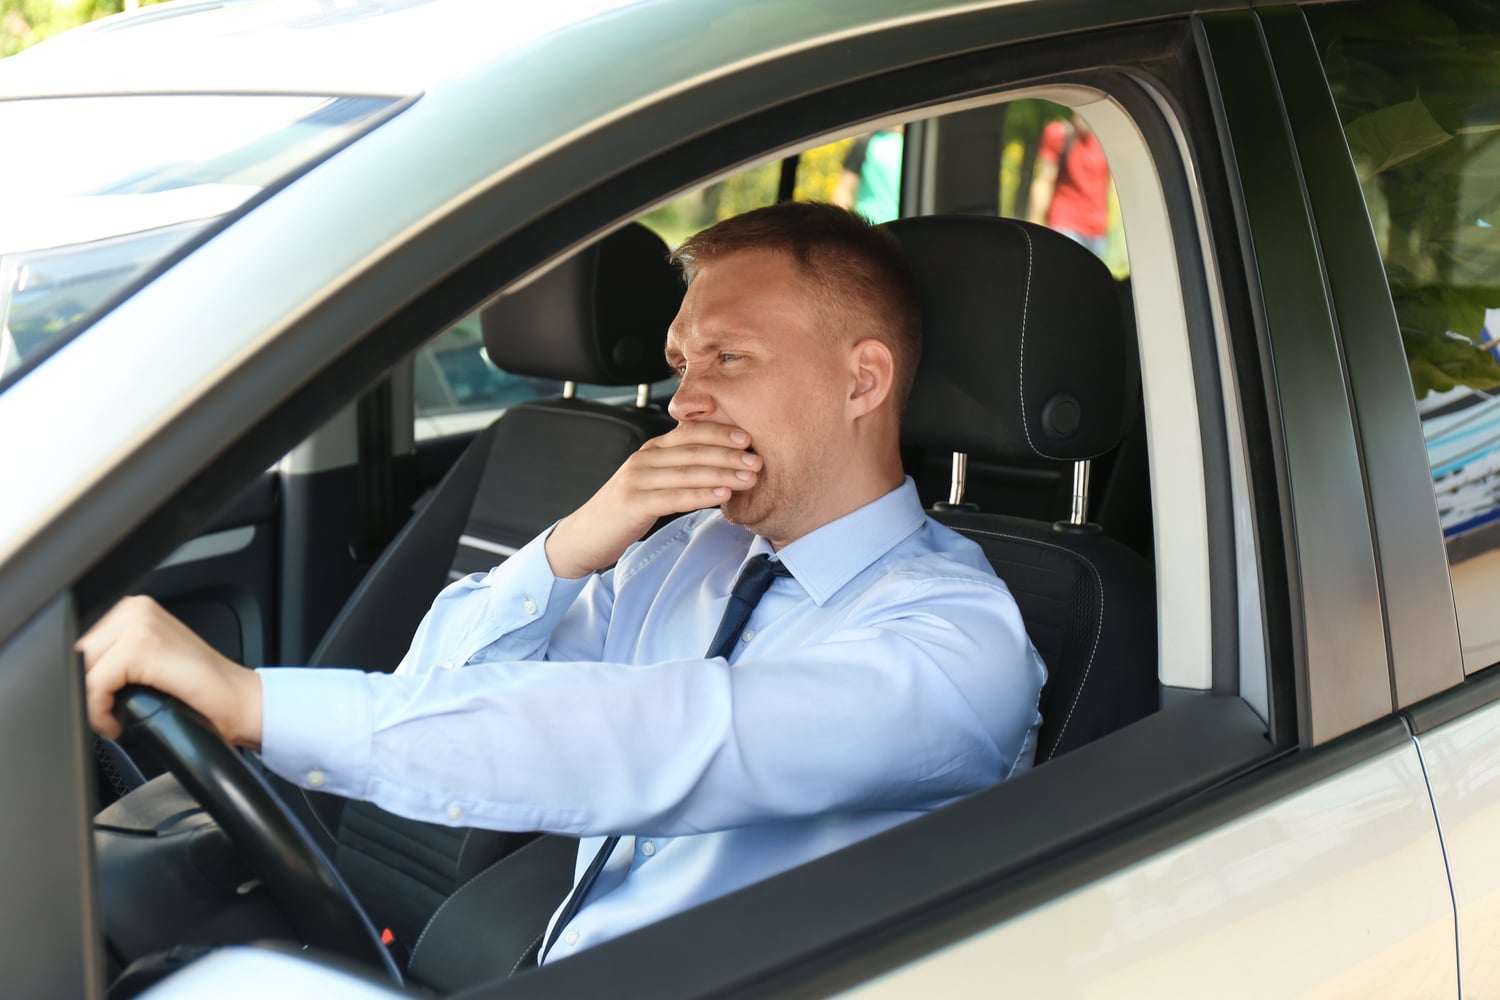 Why Is Drowsy Driving So Dangerous?